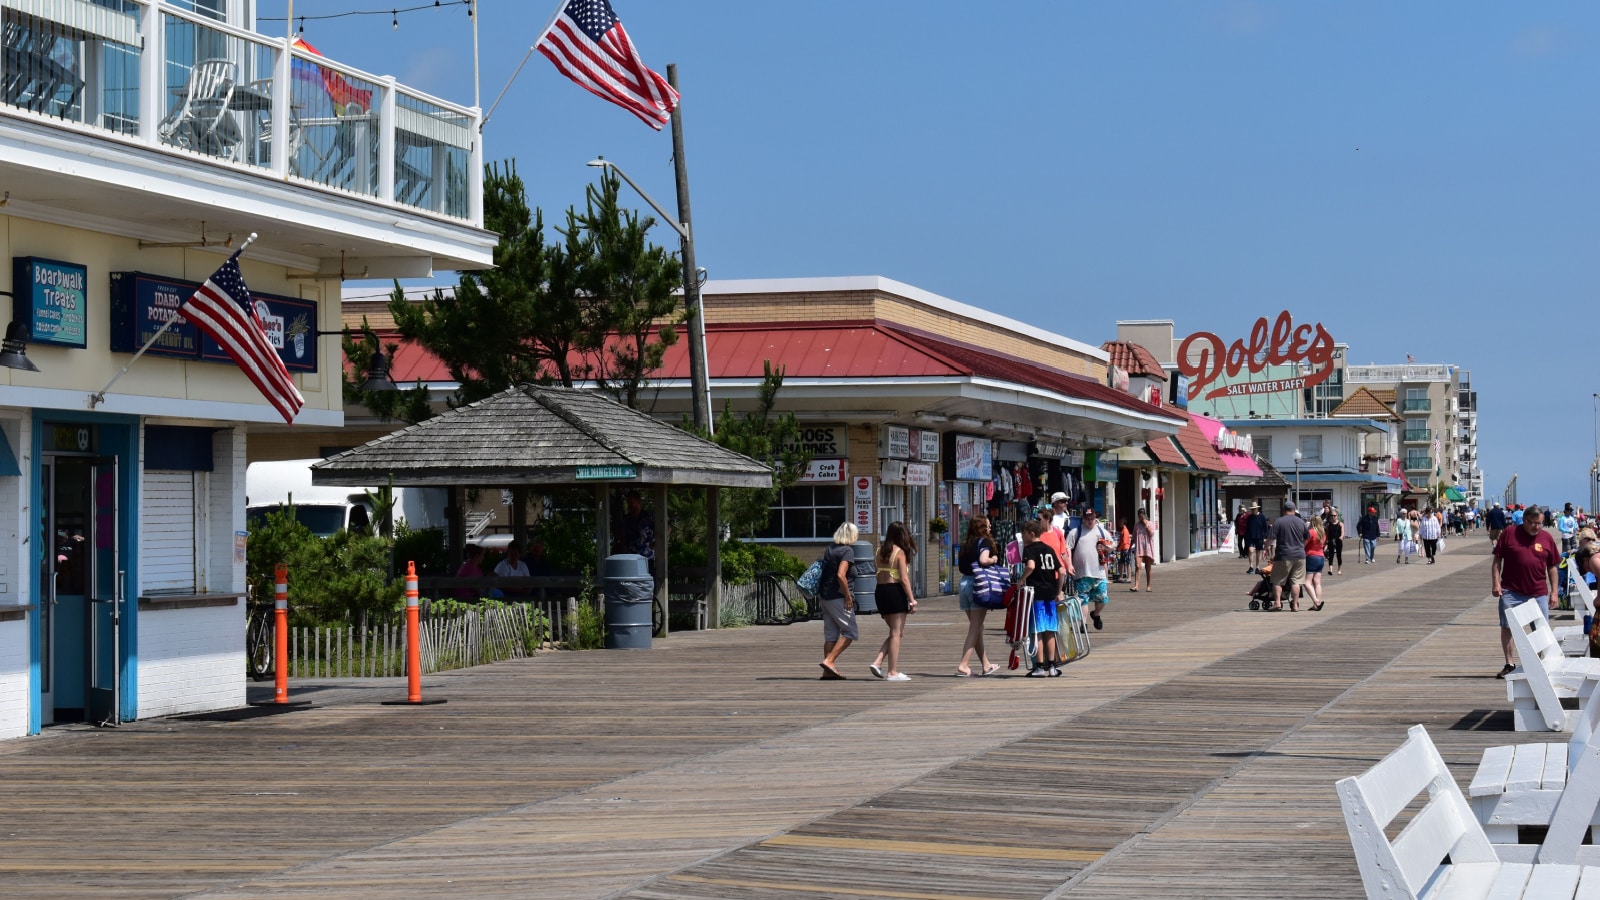 Rehoboth Beach, DE, USA, June 15, 2021 - Delaware beaches are open. With the decline COVID cases, people are flocking to Delaware’s Rehoboth Beach and it’s shops along the boardwalk.